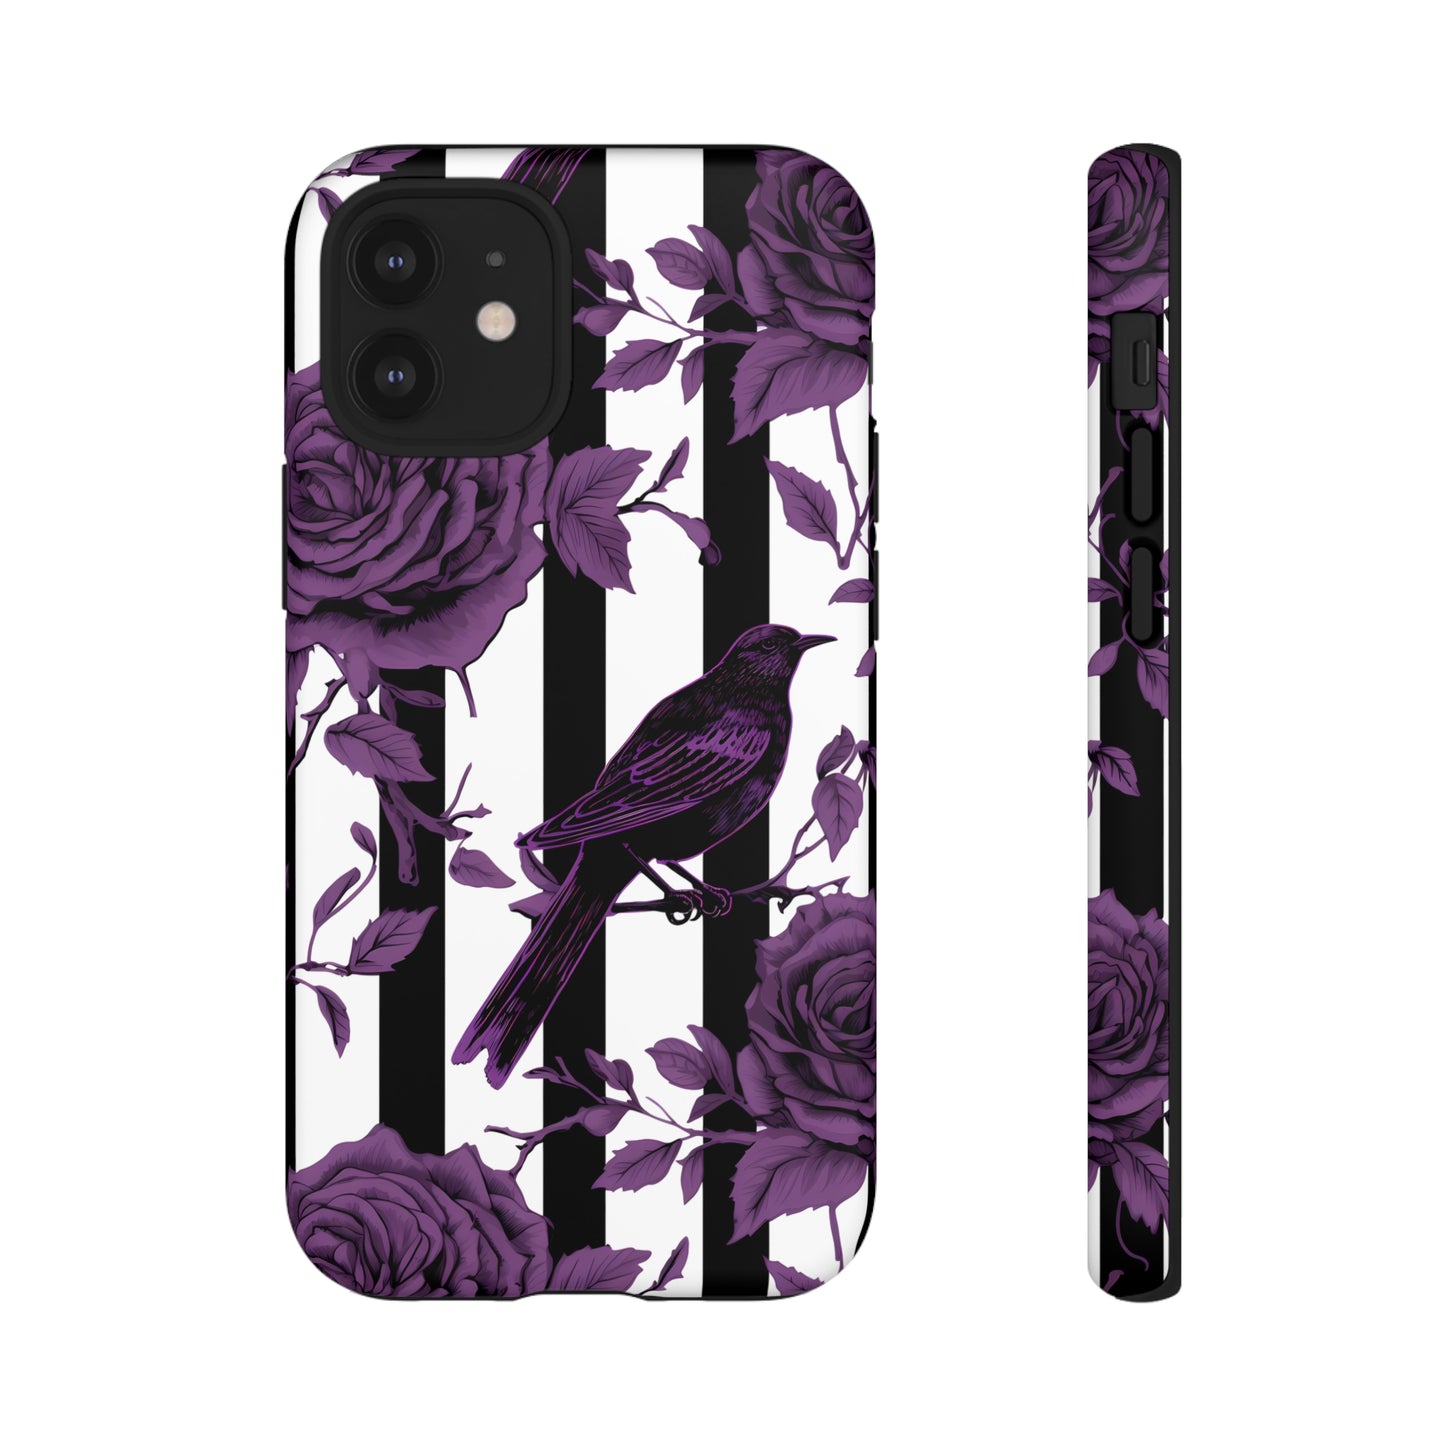 Striped Crows and Roses Tough Cases for iPhone Samsung Google PhonesPhone CaseVTZdesignsiPhone 12 MiniMatteAccessoriescrowsGlossy